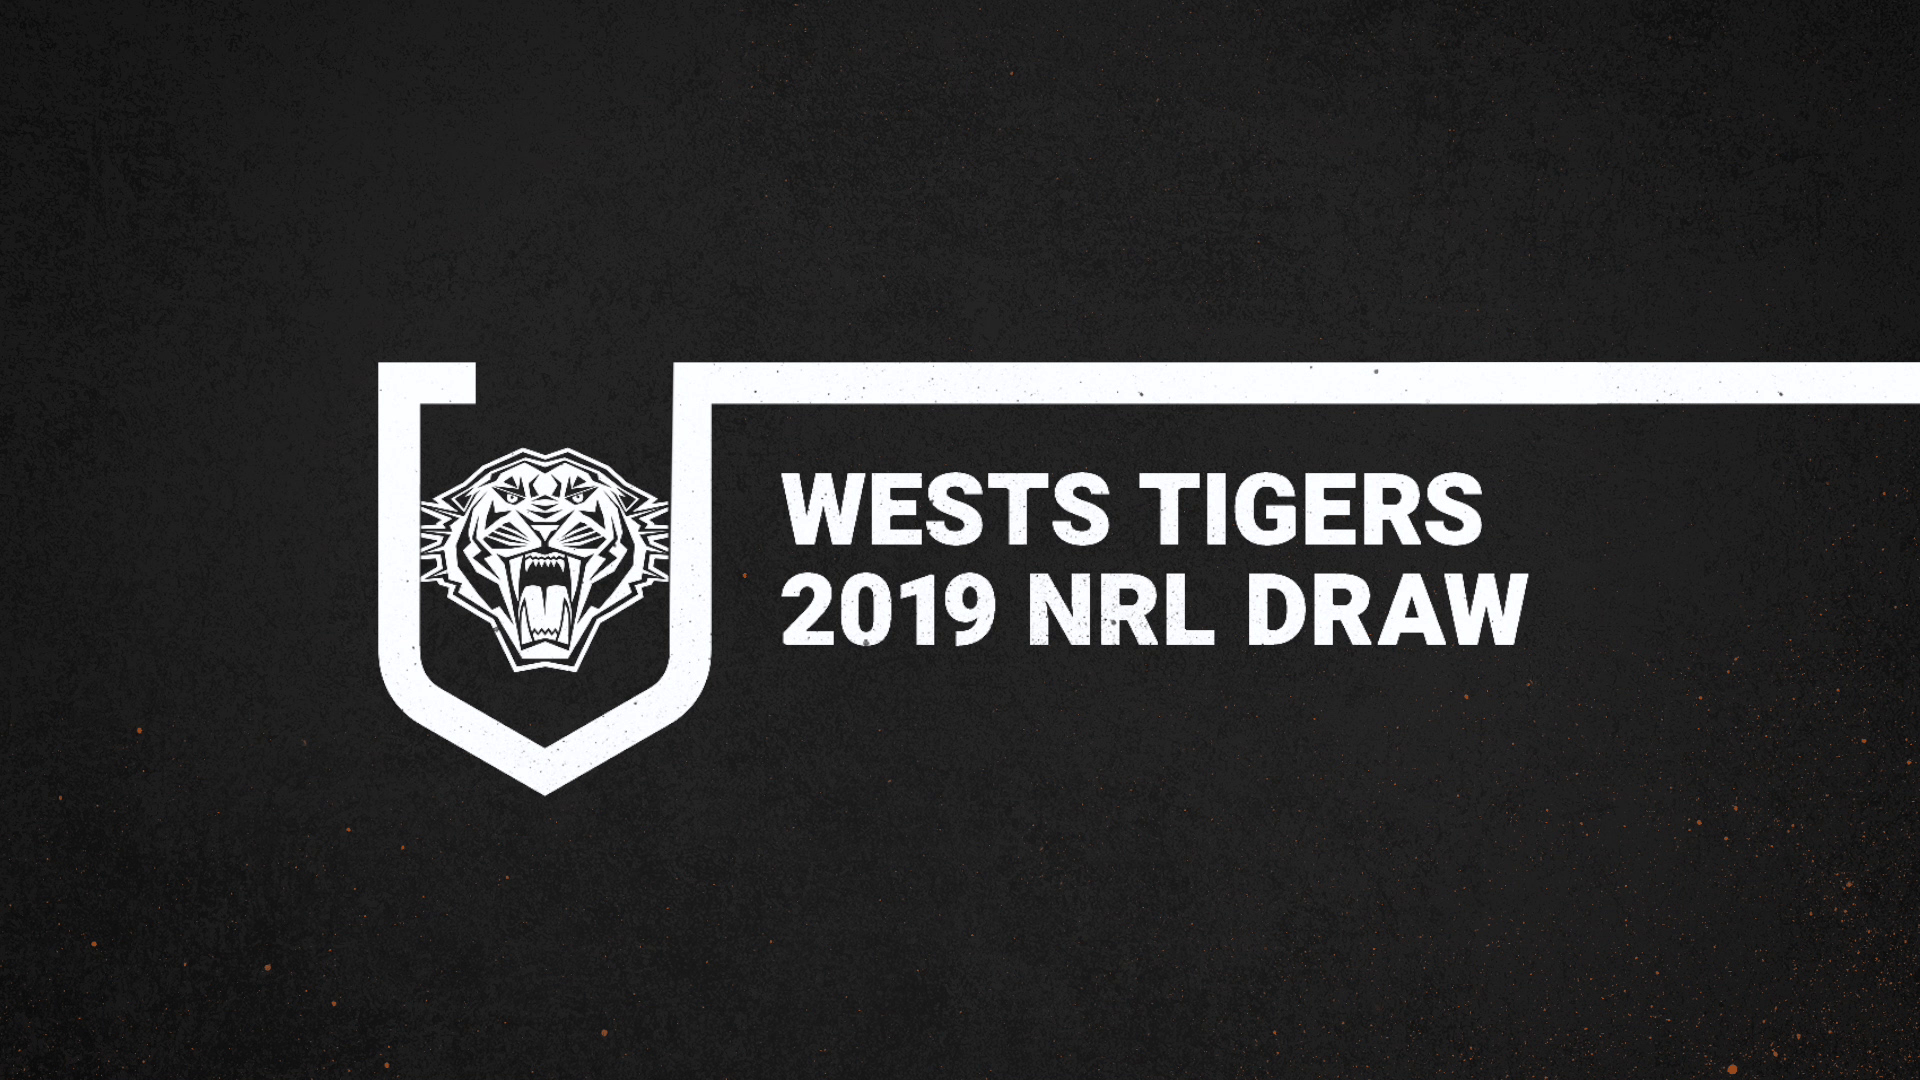 Wests Tigers 2019 draw reveal